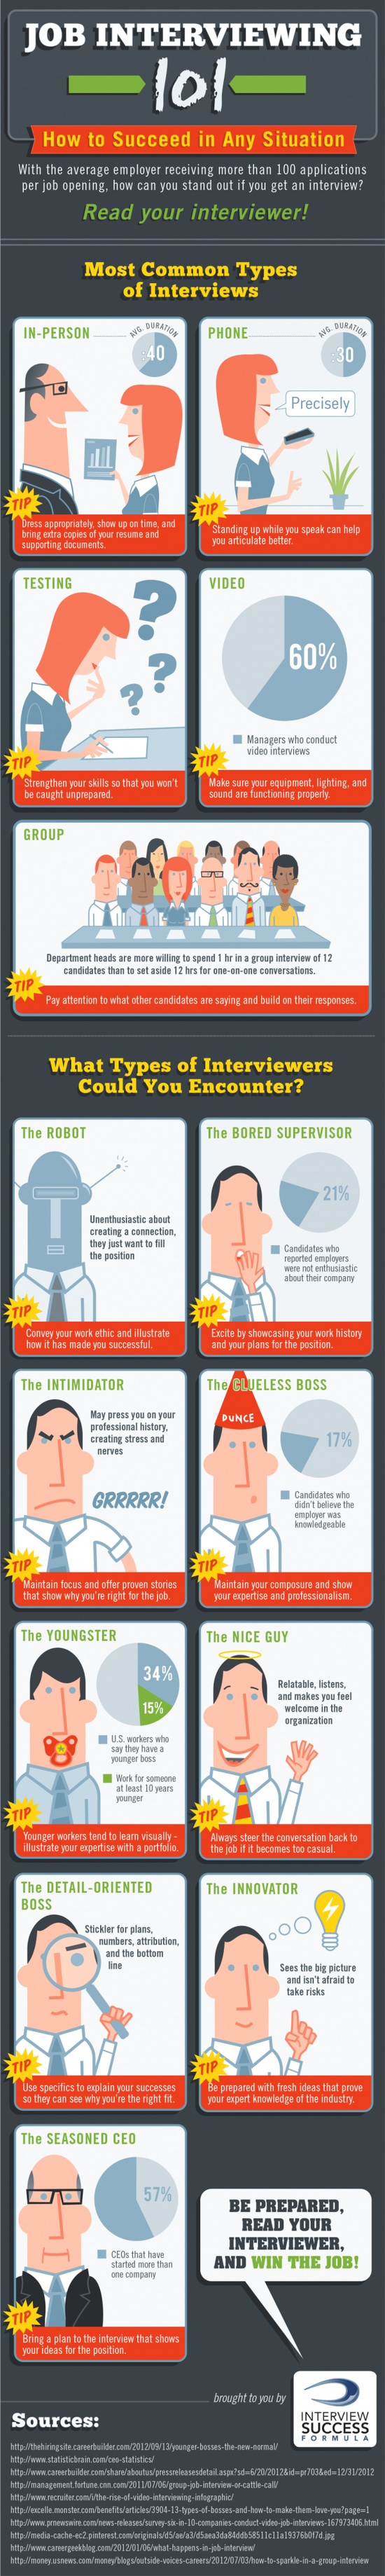 Most Common Interview Types